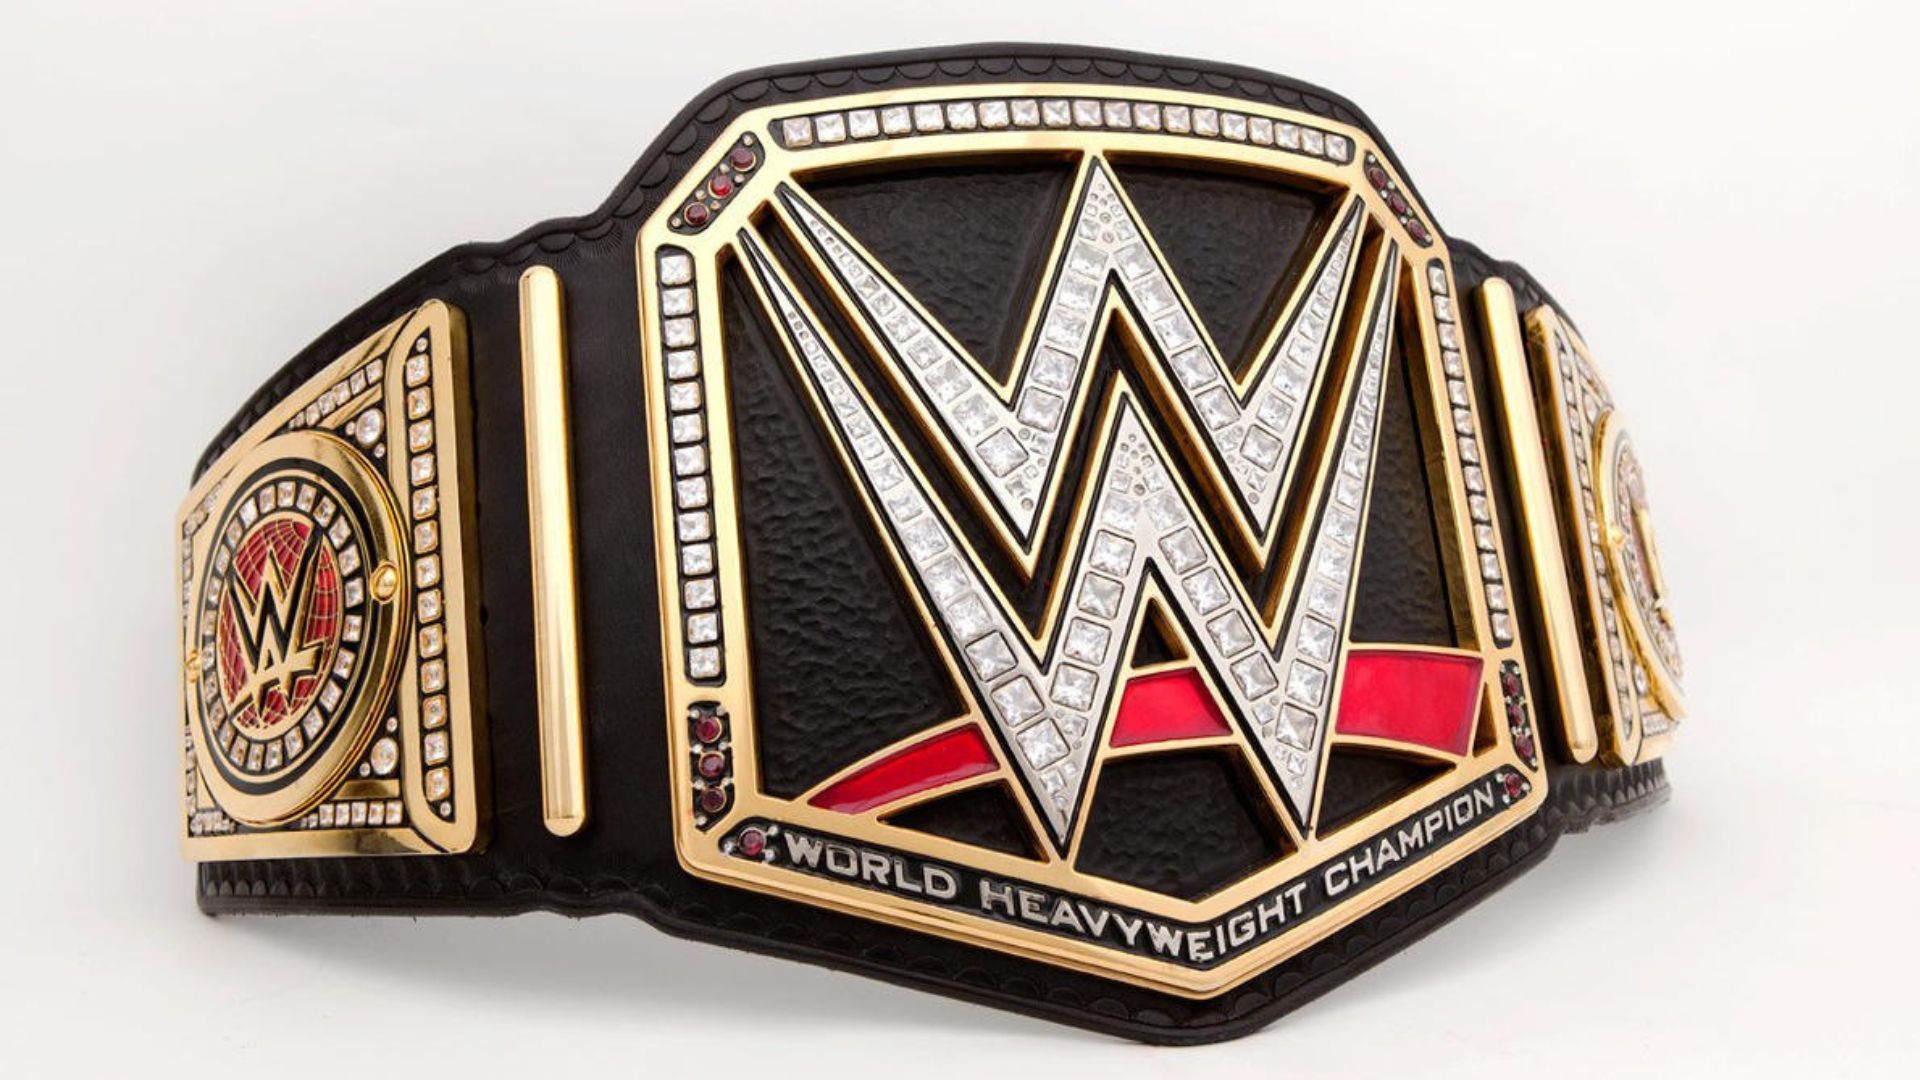 New WWE Championship was introduced in 2014 to Brock Lesnar!